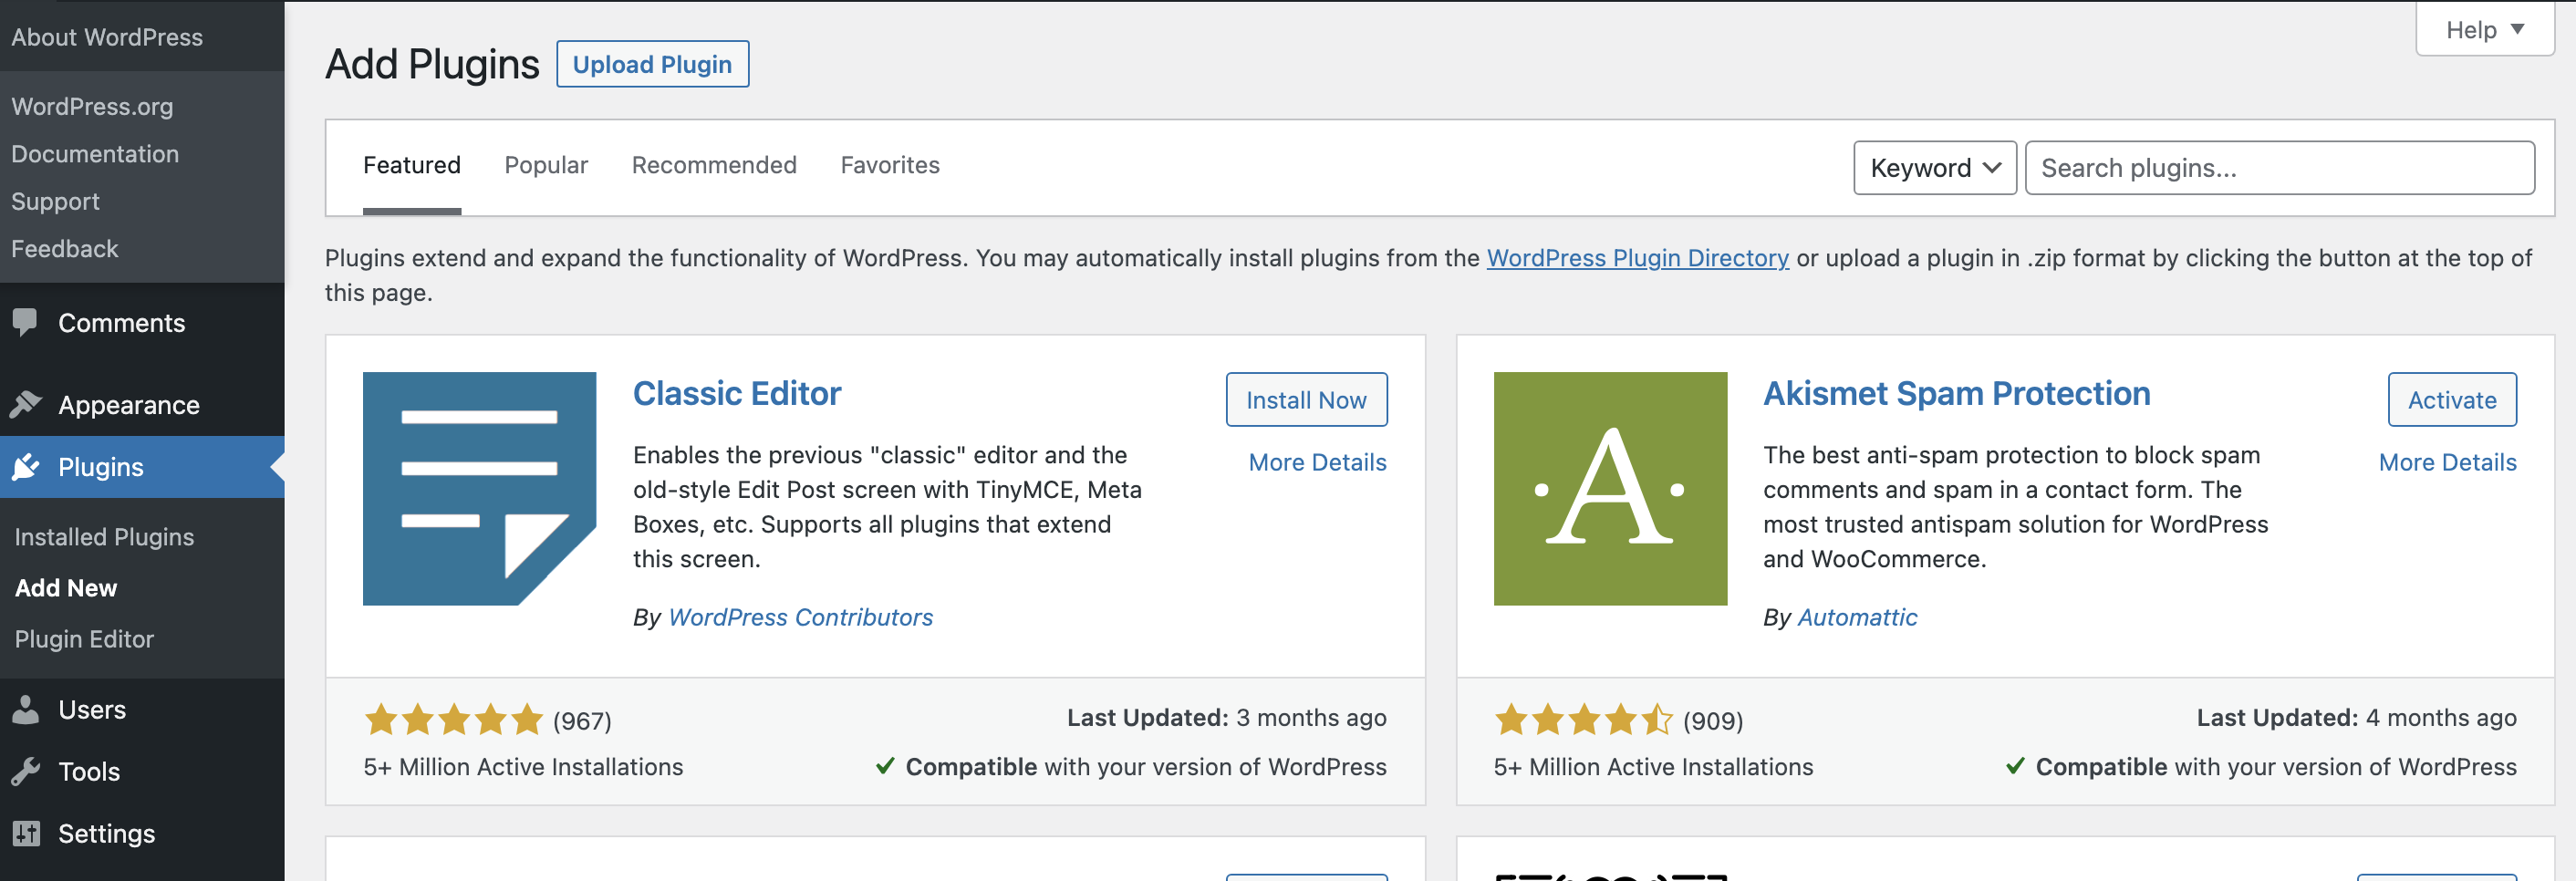 Screenshot showing the Add New link selected in the Plugins sidebar in WordPress Admin